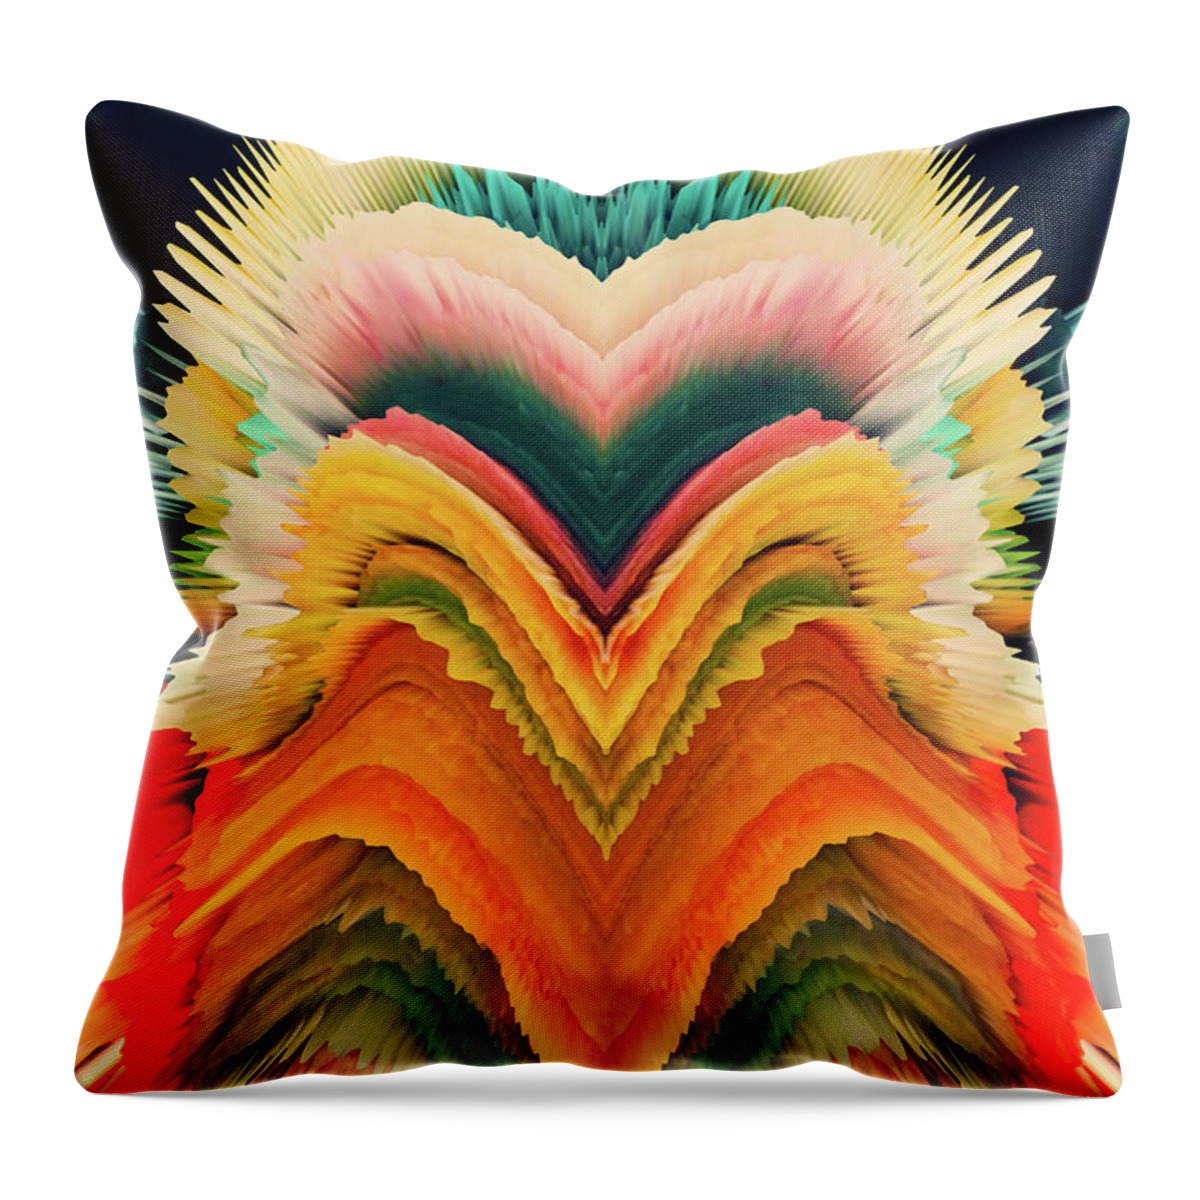 Abstract Throw Pillow featuring the photograph Vivid Eruption by Colleen Taylor